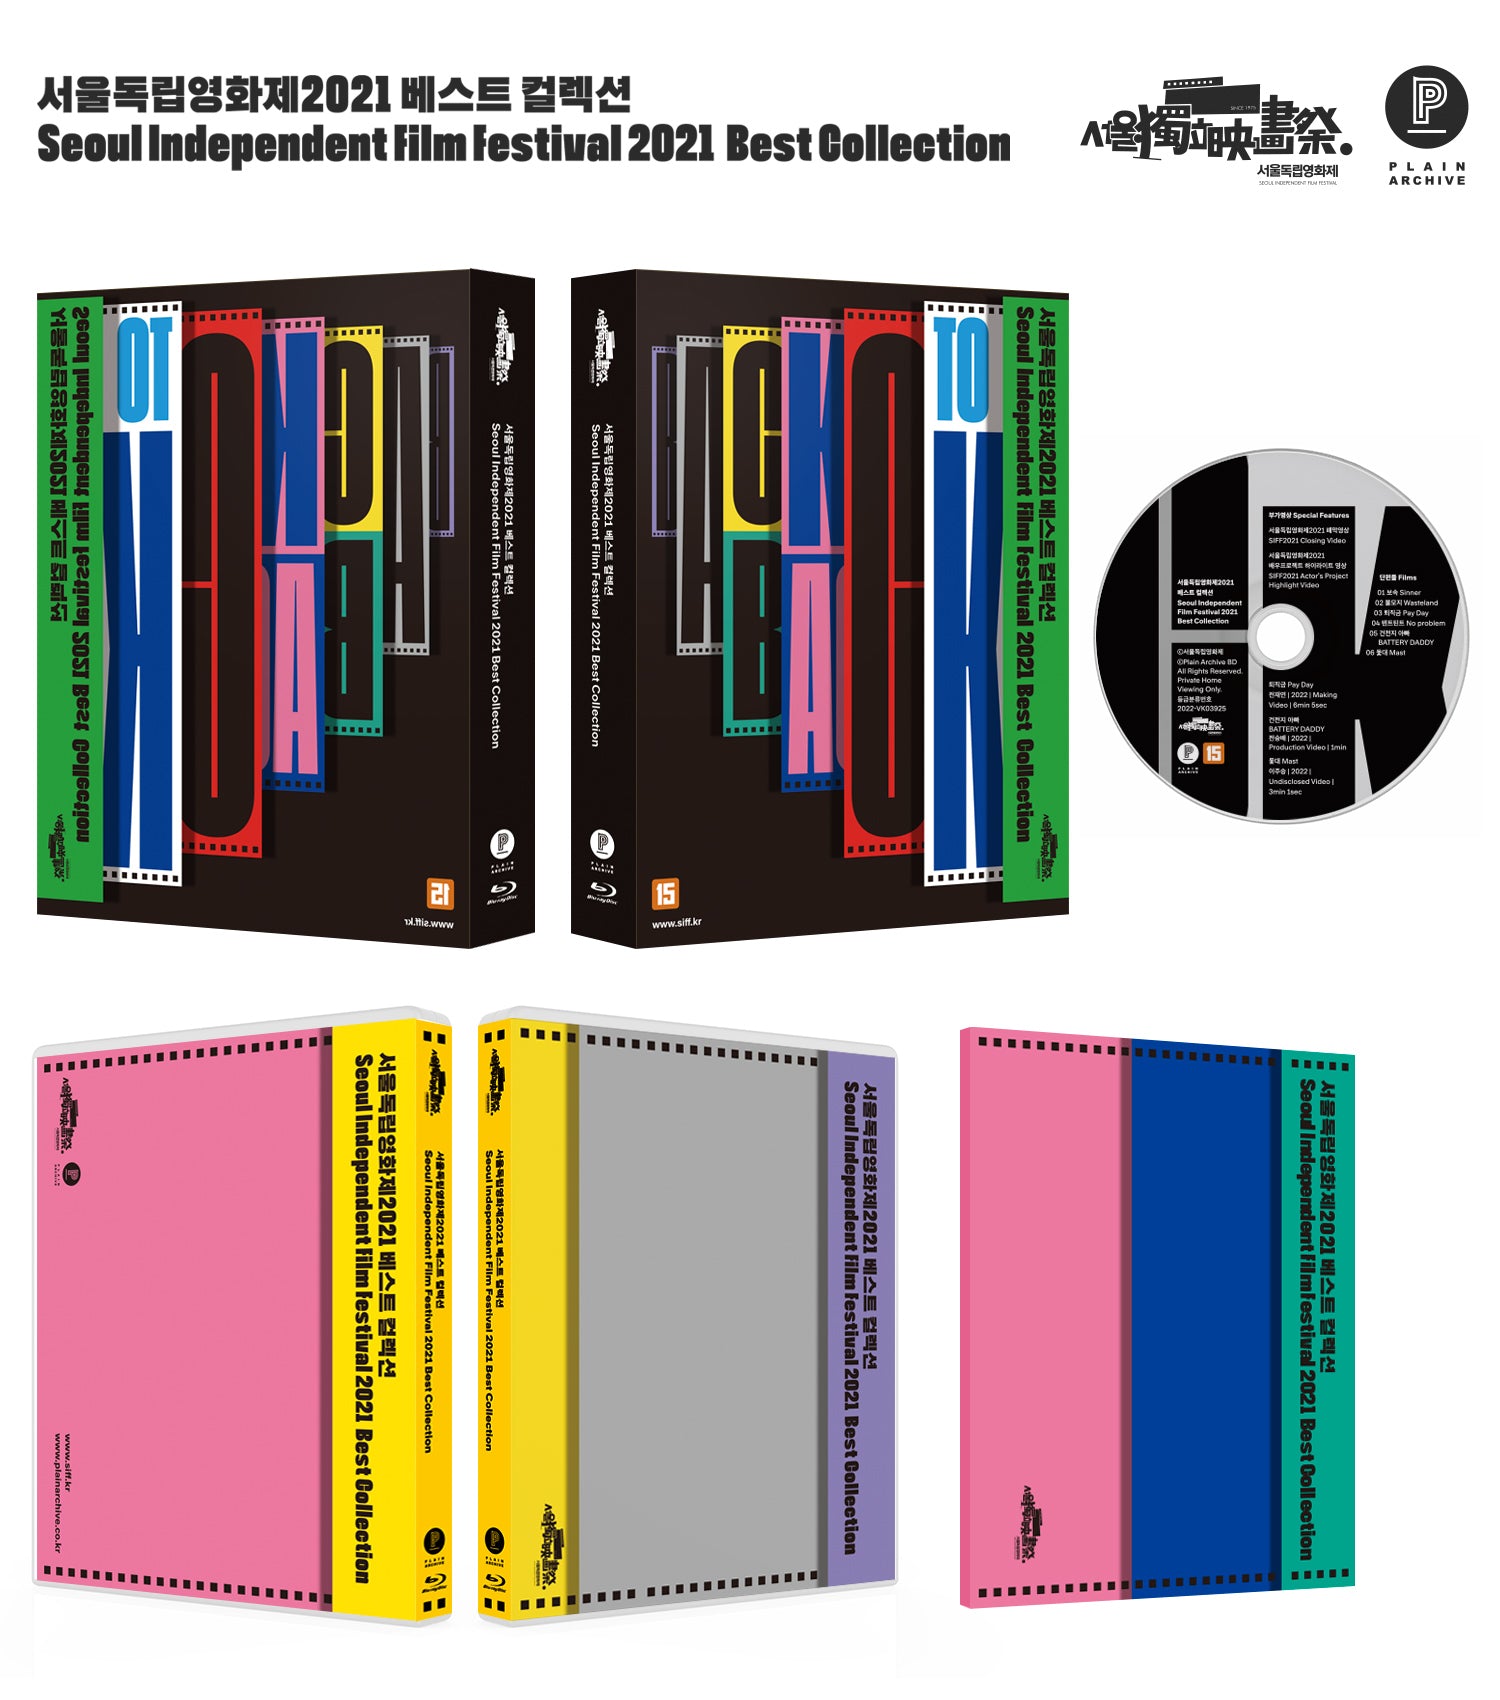 Seoul Independent Film Festival 2021 Best Collection (Limited Edition)